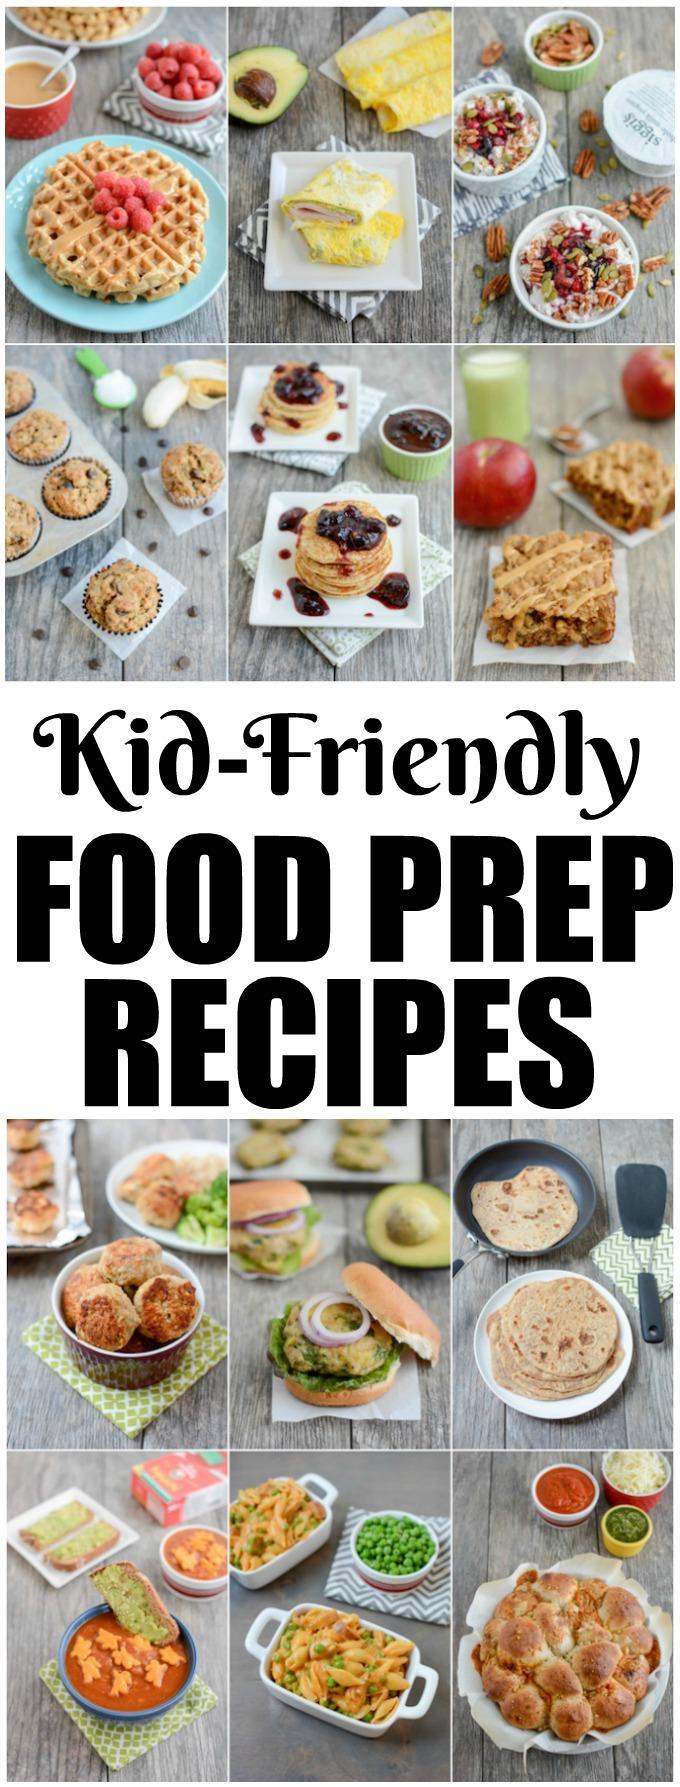 These Kid-Friendly Food Prep Recipes are great additions to your weekly meal prep sessions. Having healthy options on hand for breakfast, lunch, dinner and snack time can help you eat healthy during busy weeks!